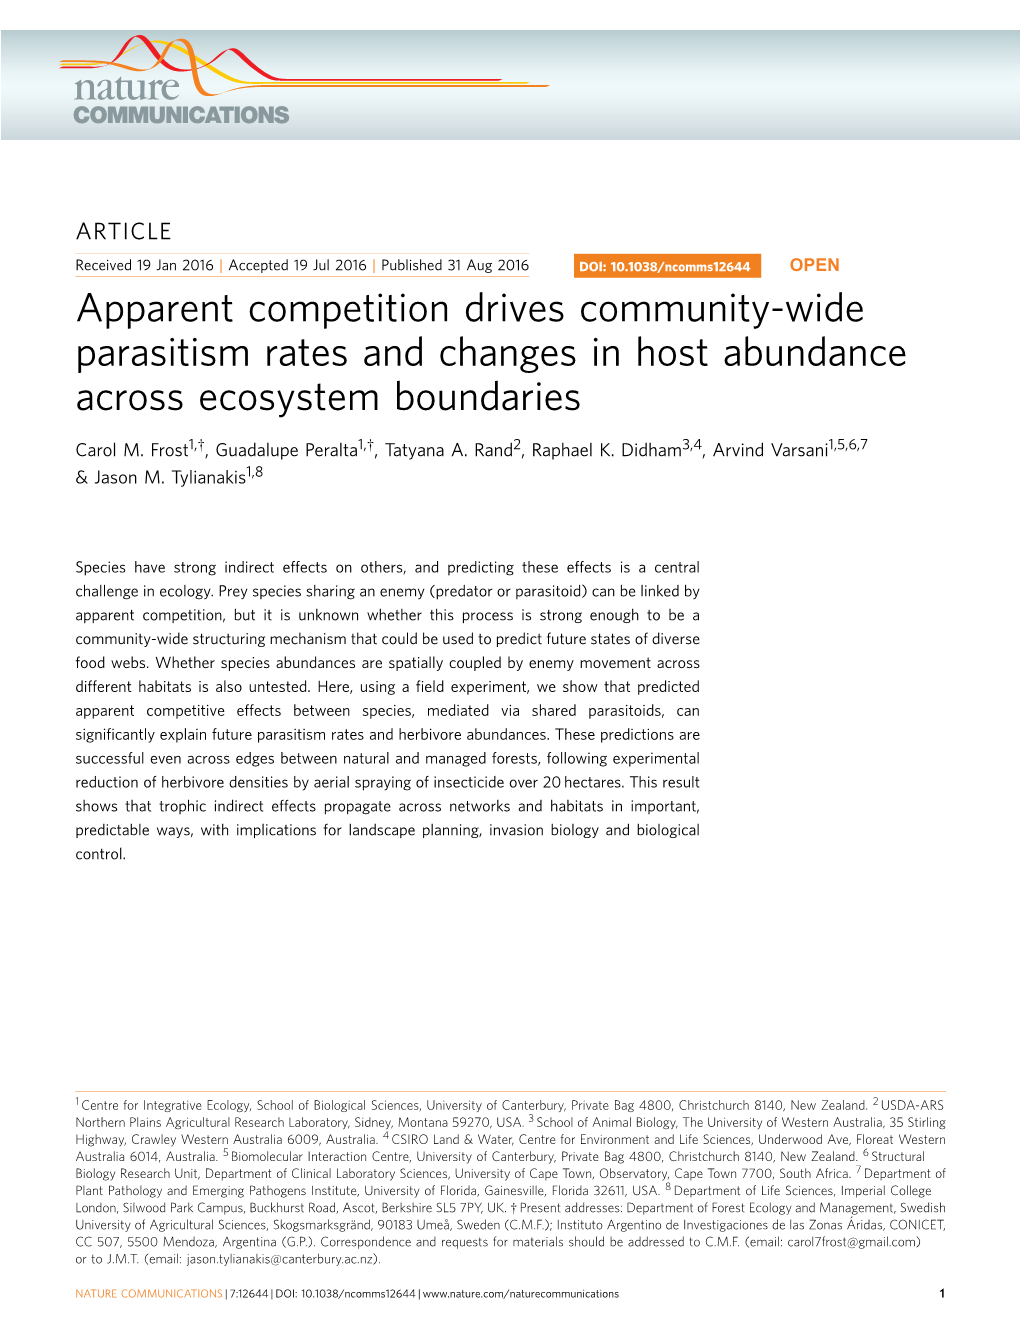 Apparent Competition Drives Community-Wide Parasitism Rates and Changes in Host Abundance Across Ecosystem Boundaries